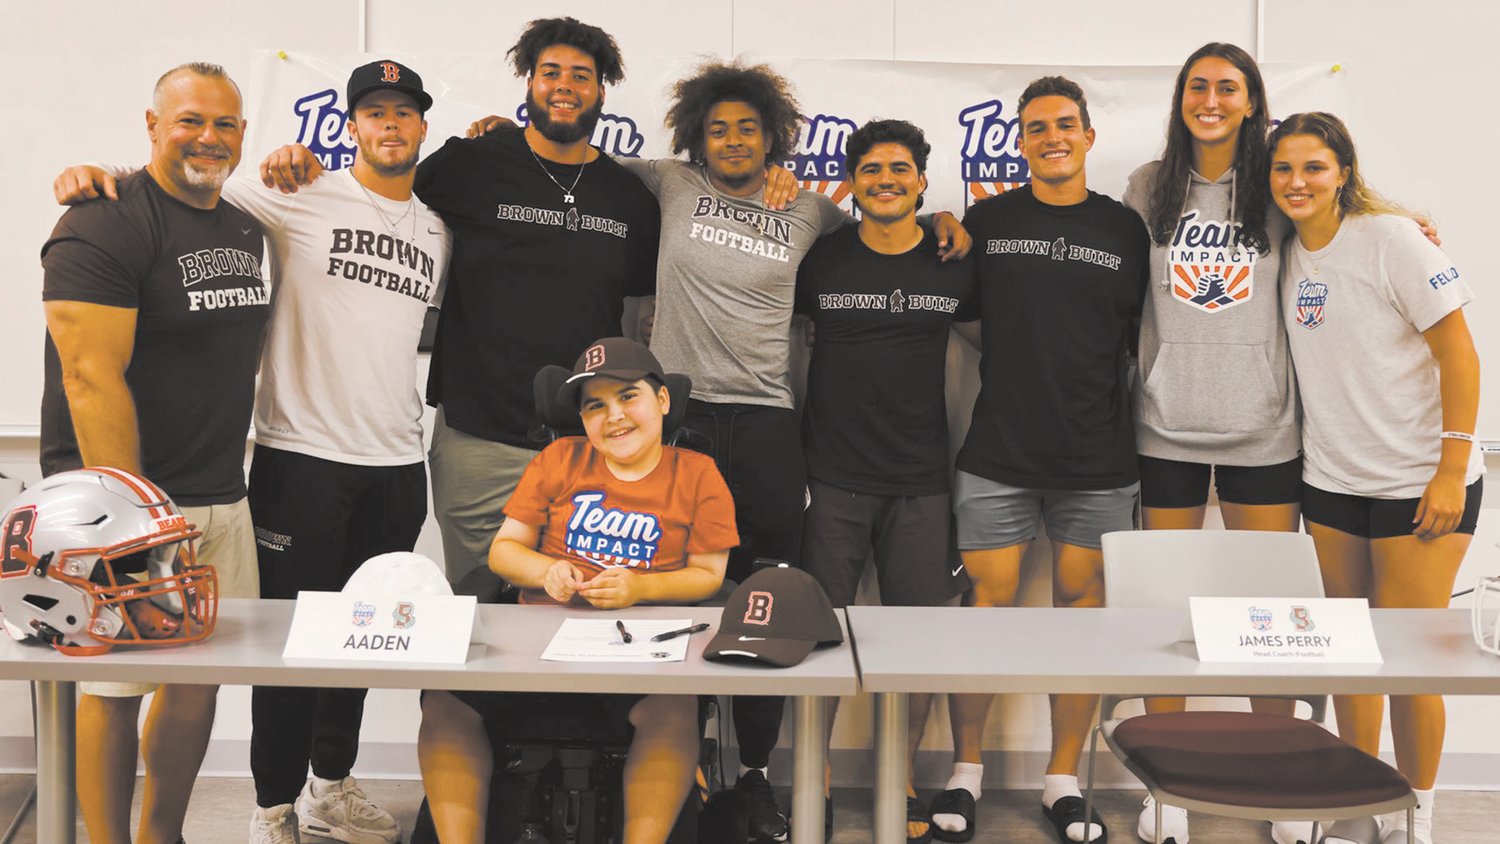 HE’S A BEAR: 13-year-old Aaden Bessette of Warwick signs on with the Brown Football team through Team Impact. (Submitted photo)